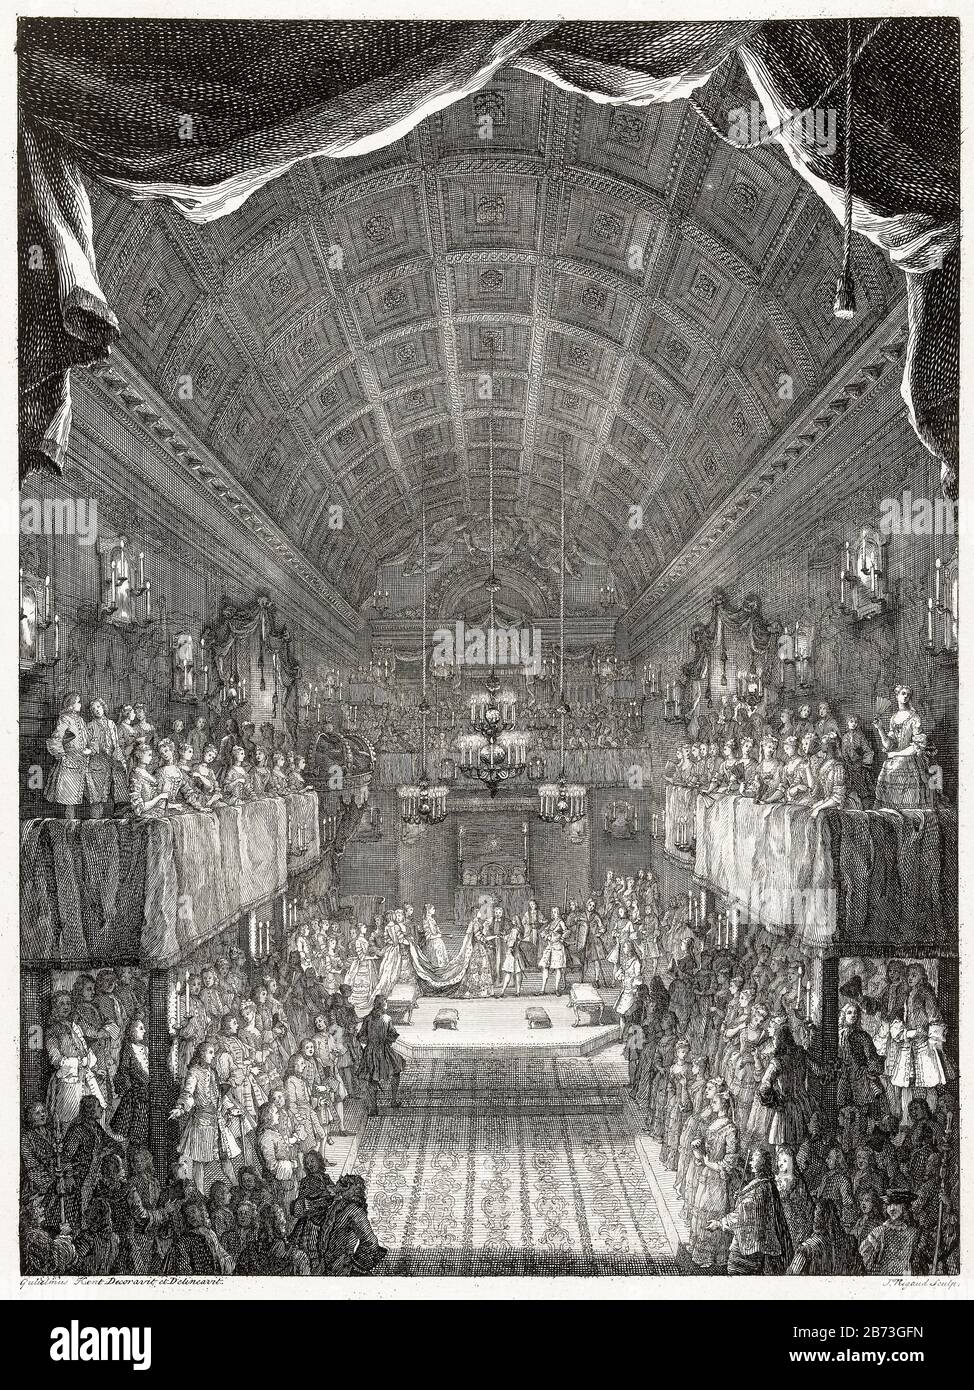 The wedding of William IV, Prince of Orange, with Anne, Princess Royal of England in the Chapel Royal of St James's Palace, London, March 25th 1734, 18th Century illustration by Jacques Rigaud, after William Kent, 1734 Stock Photo